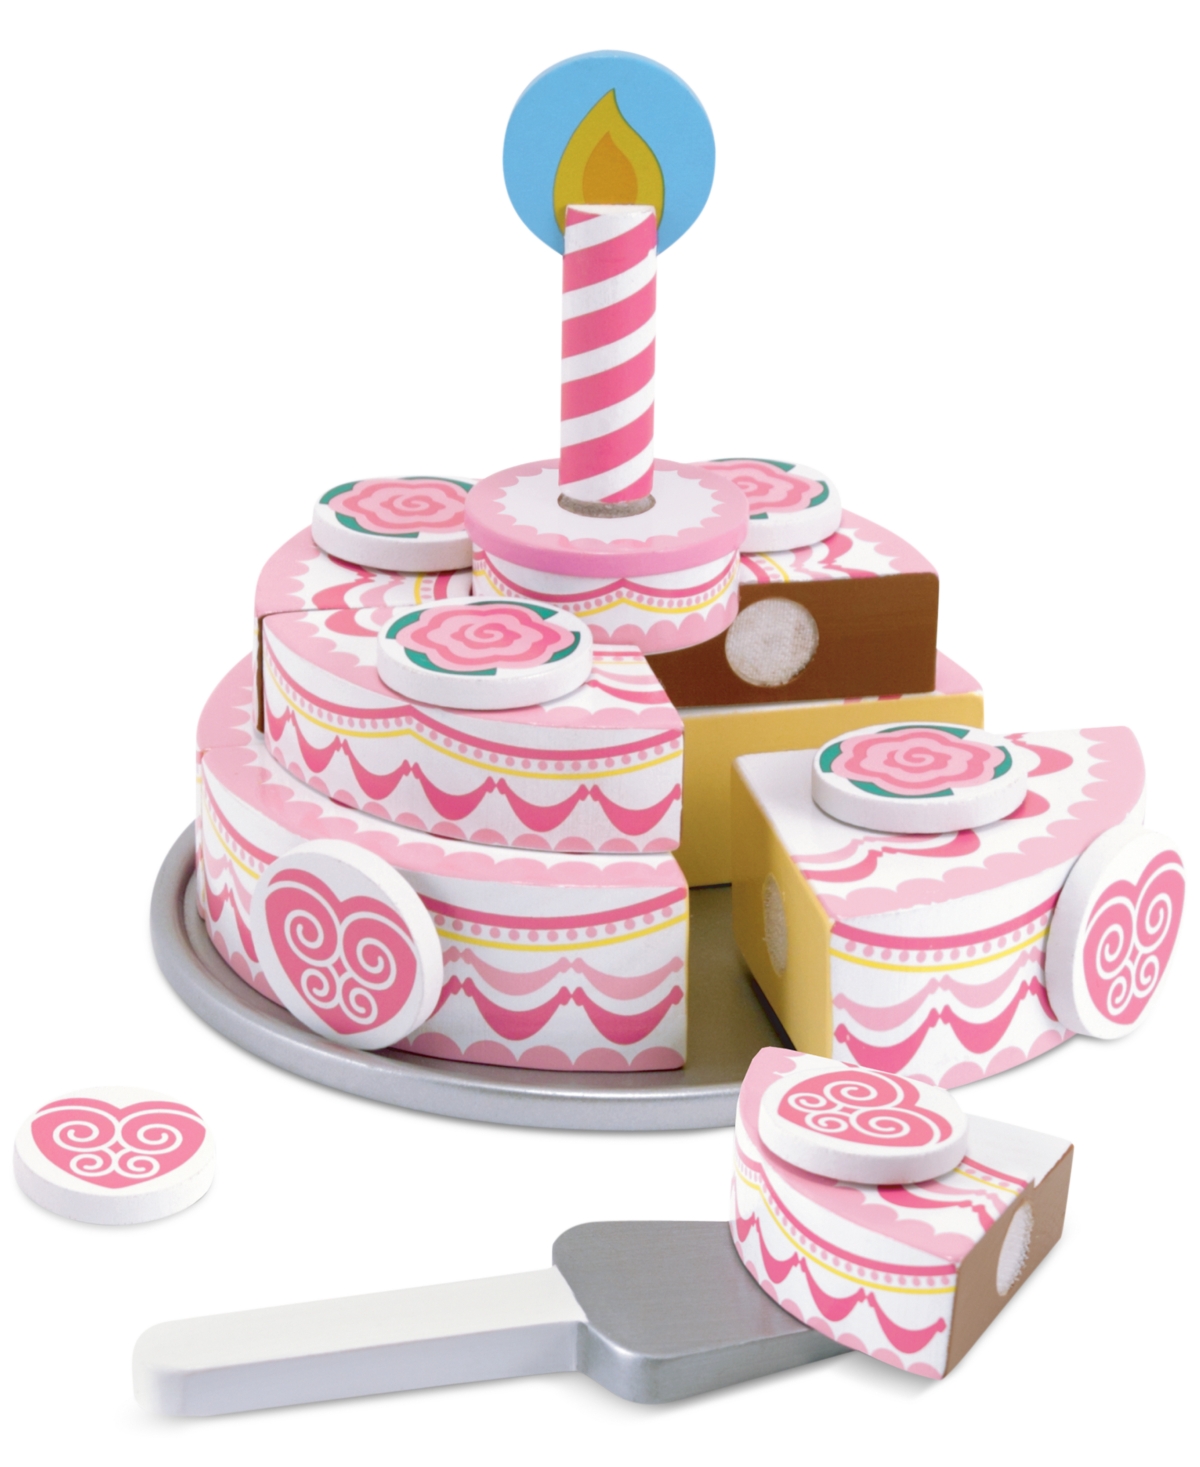 Melissa & Doug Kids Toy, Triple-layer Party Cake In Multi